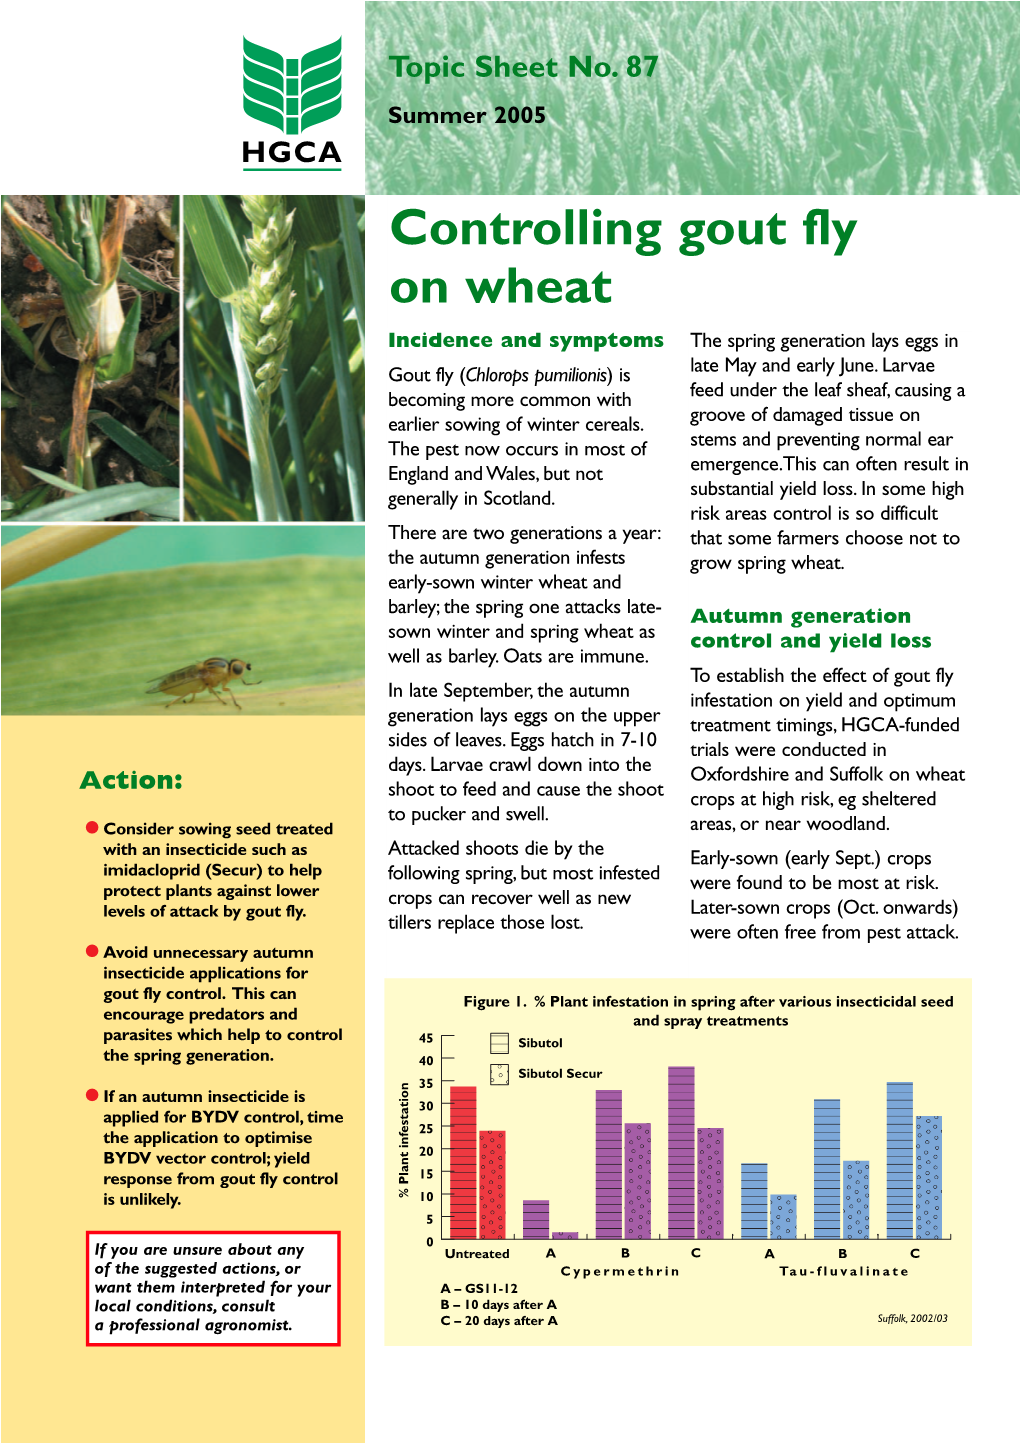 Controlling Gout Fly on Wheat